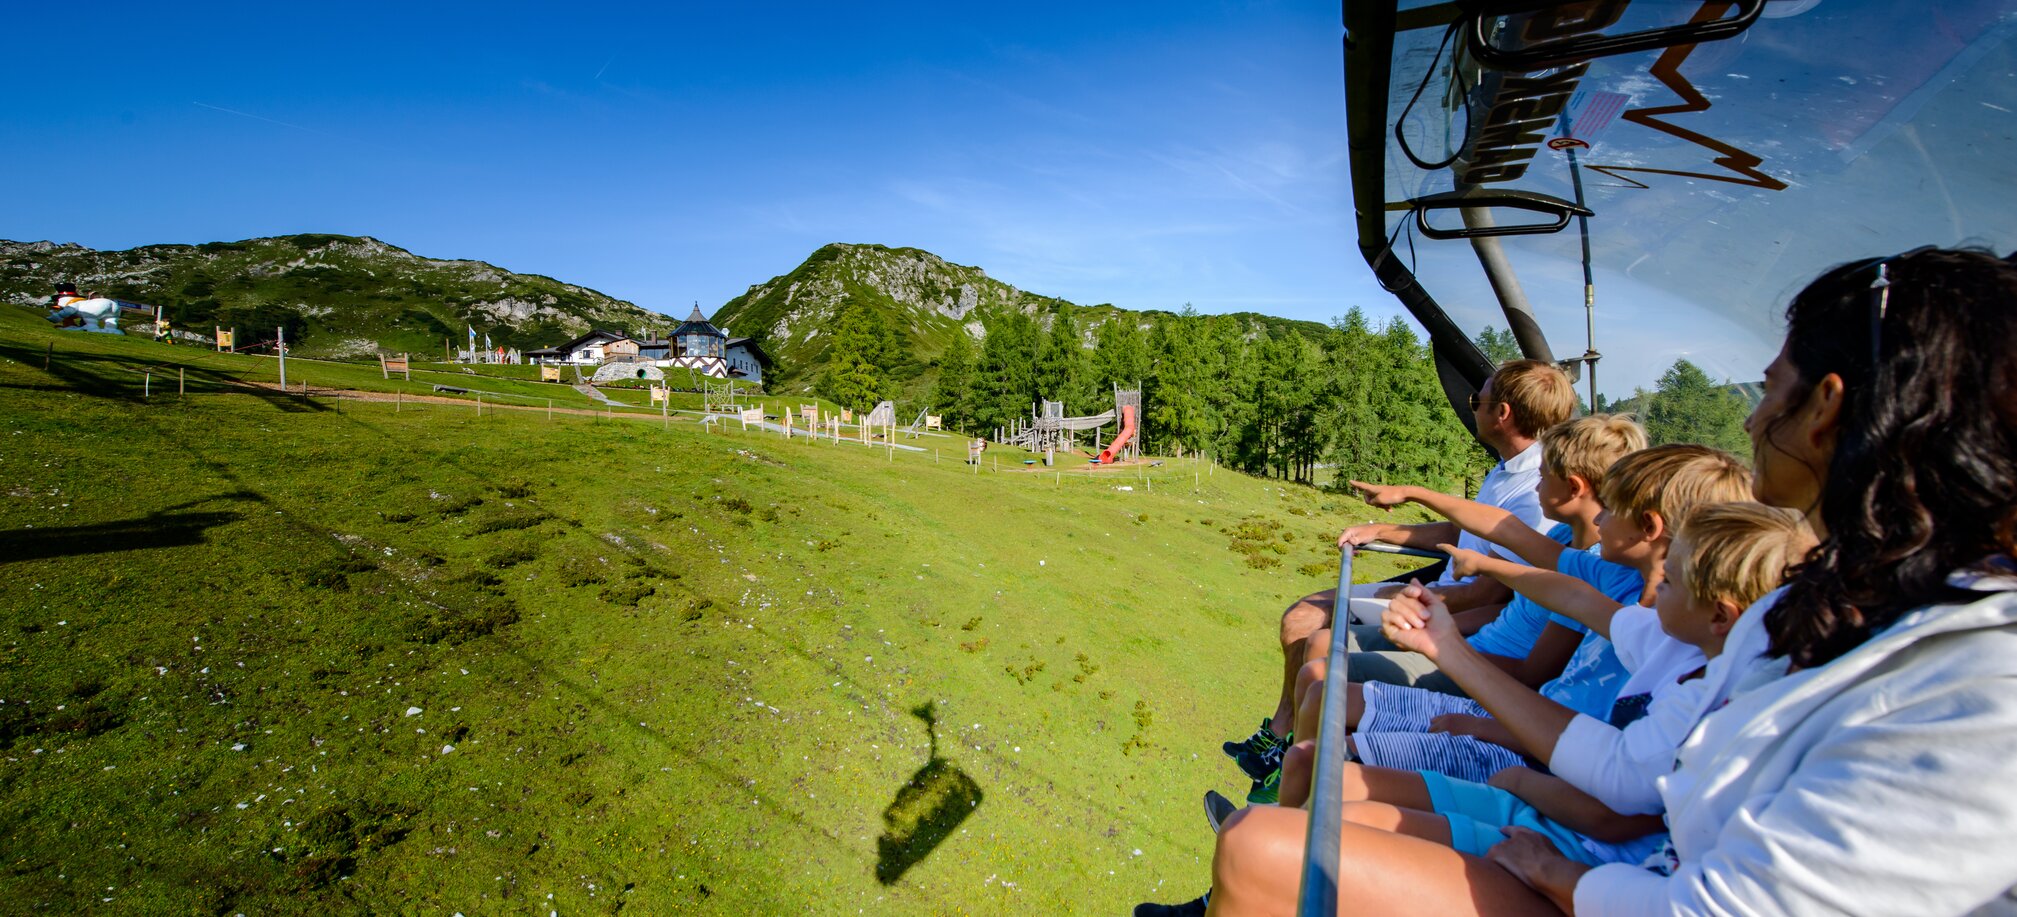 Taking the lift up the mountain in Zauchensee during summer in the Salzburger Sportwelt region in Ski amadé